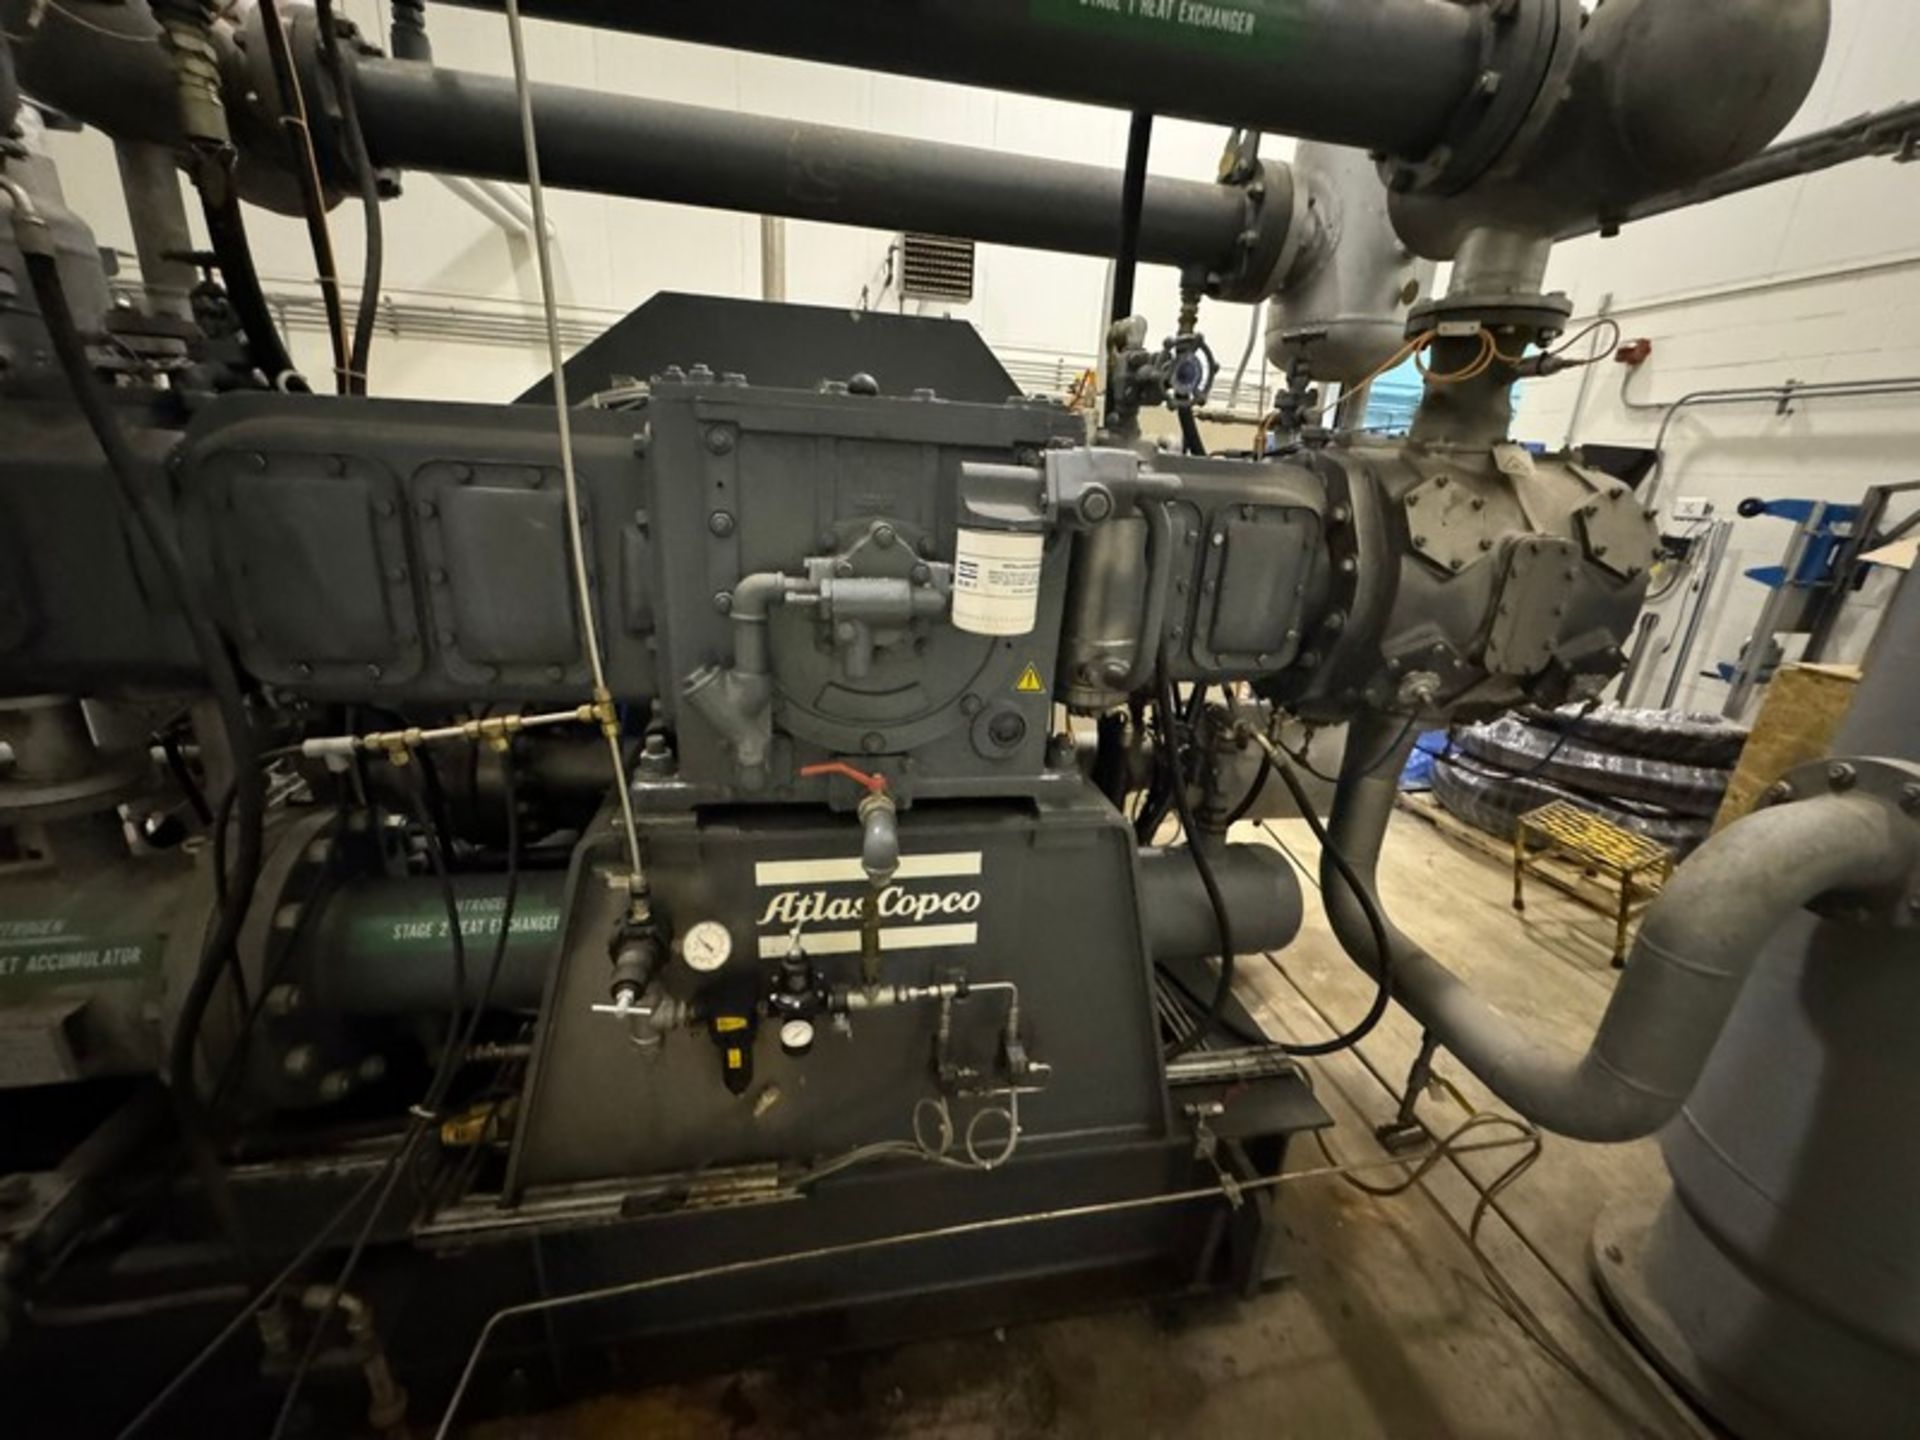 Atlas Copco 4-Stage Nitrogen Compressor, with Reliance 300 hp Motor, 1780 RPM, 460 Volts, 3 Phase, - Image 10 of 20